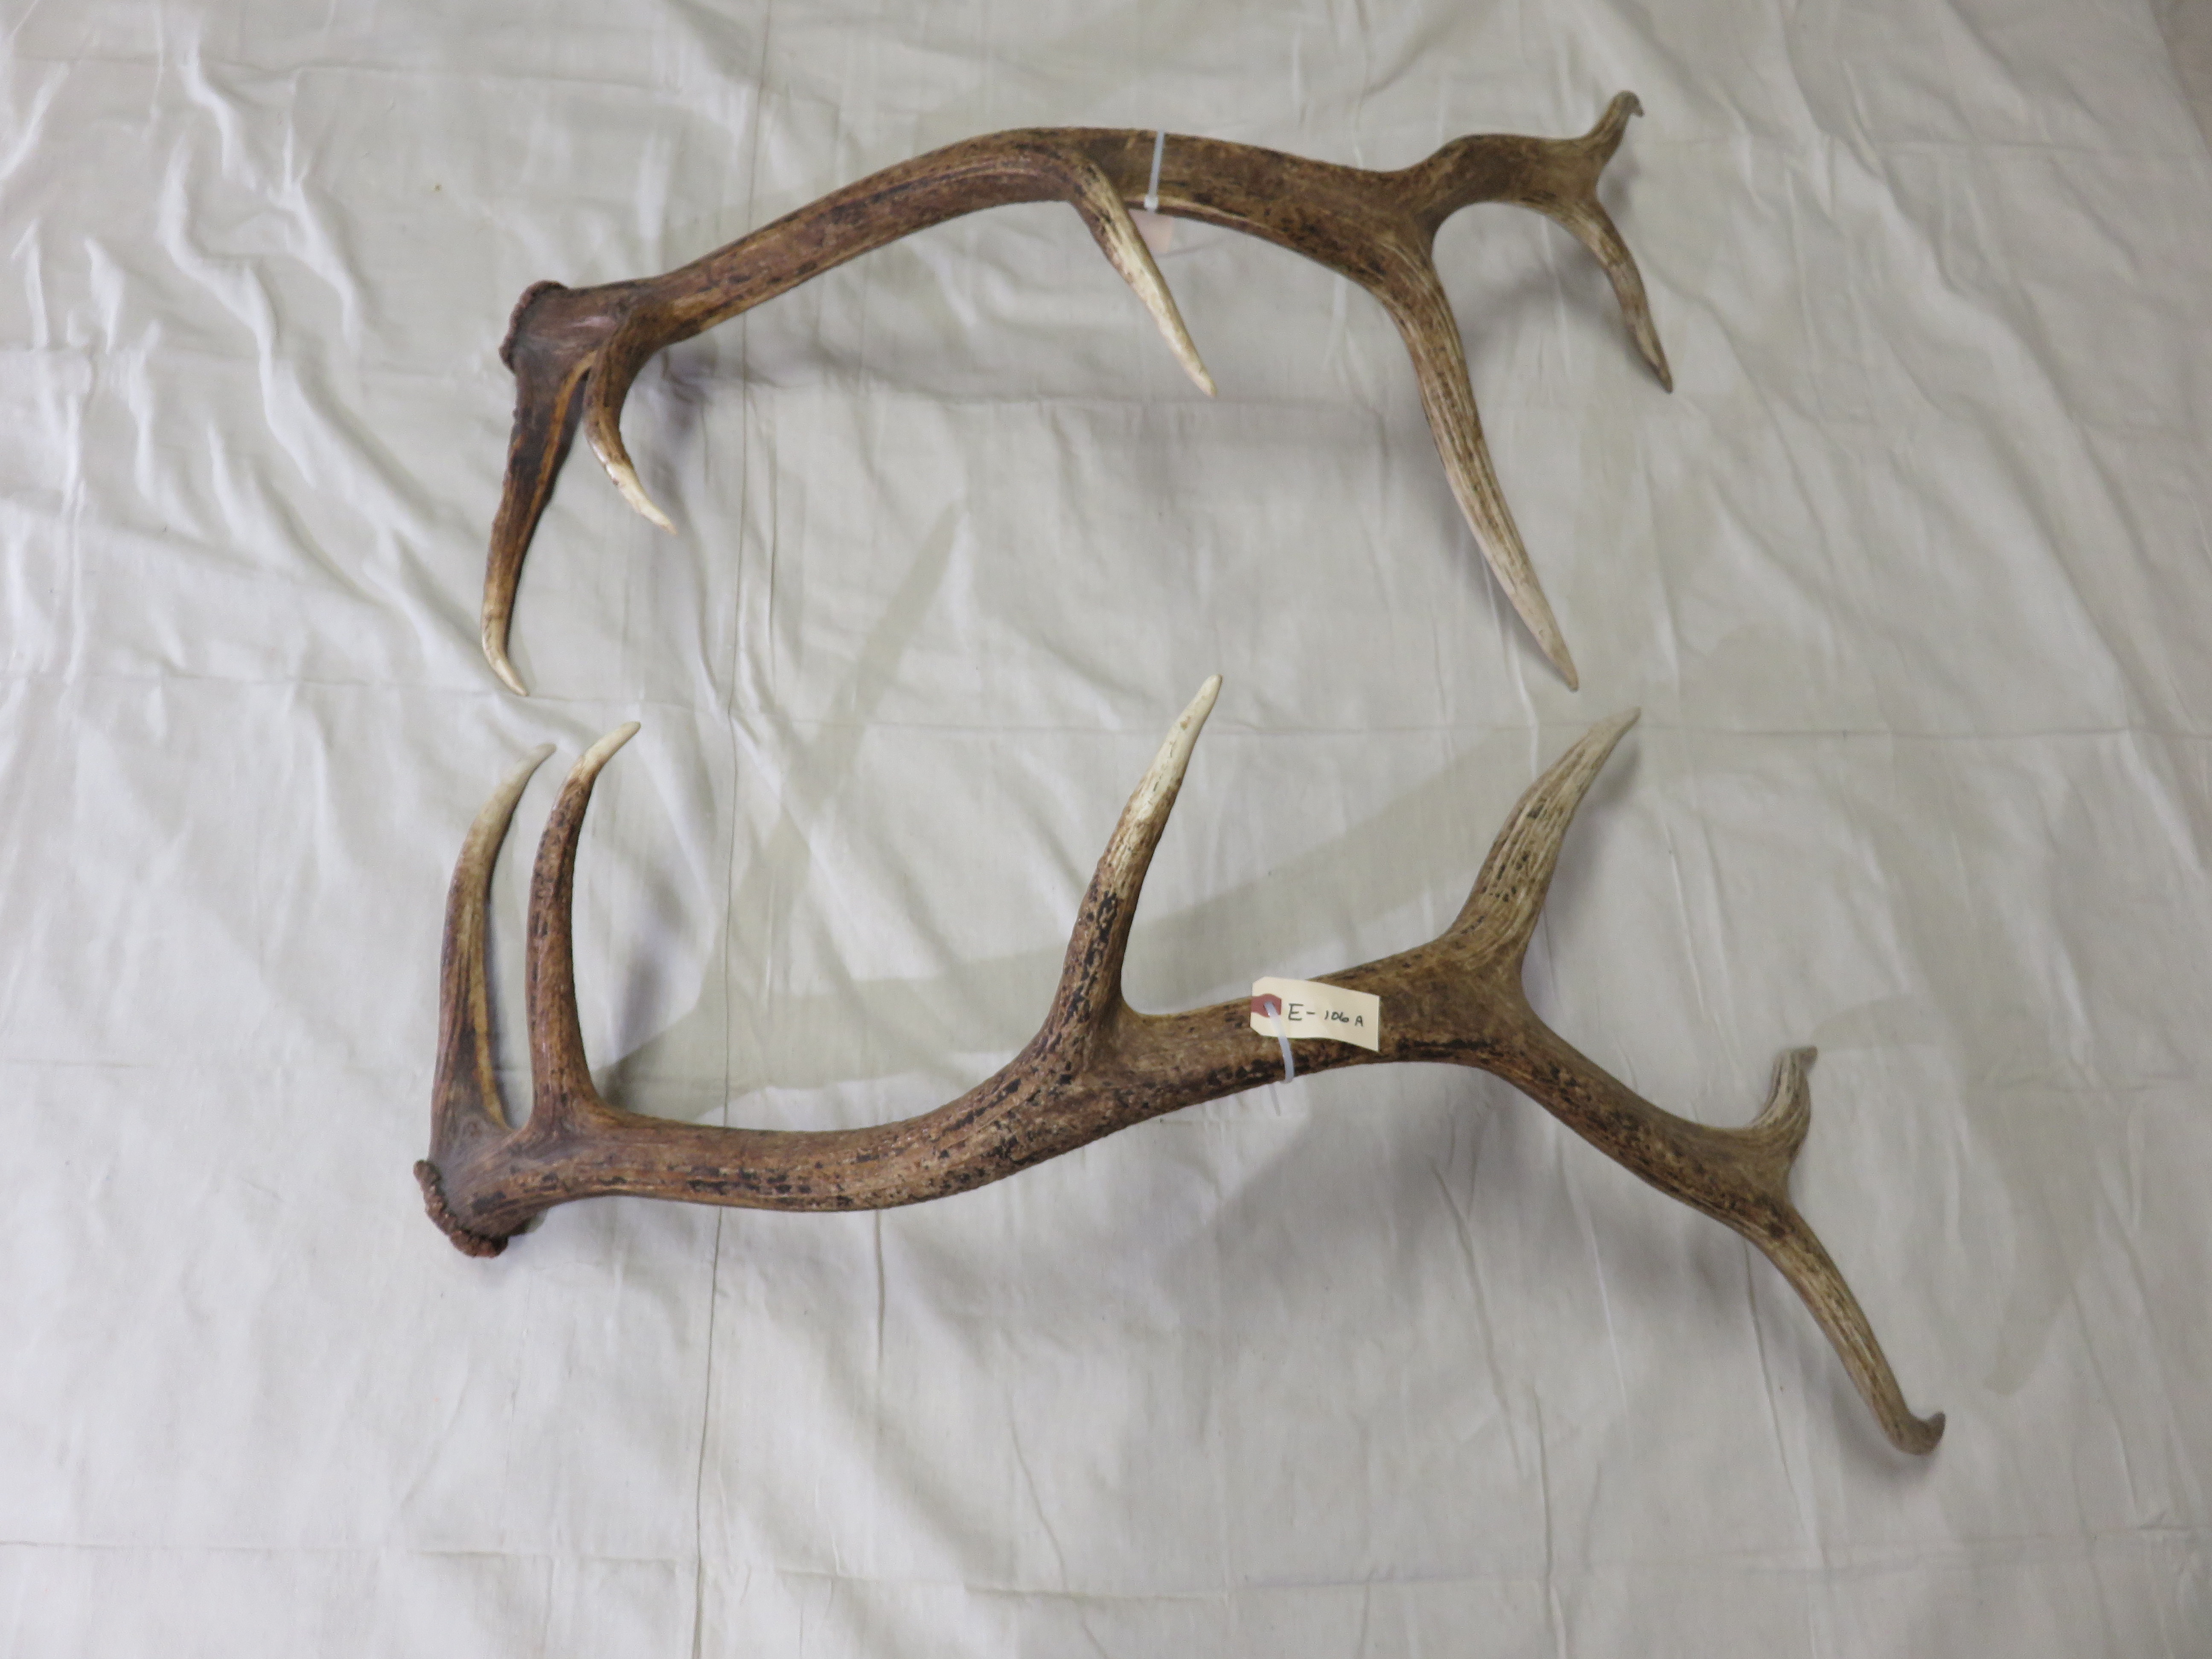 Elk Shed Antlers for sale. E-106S – Mounts For Sale